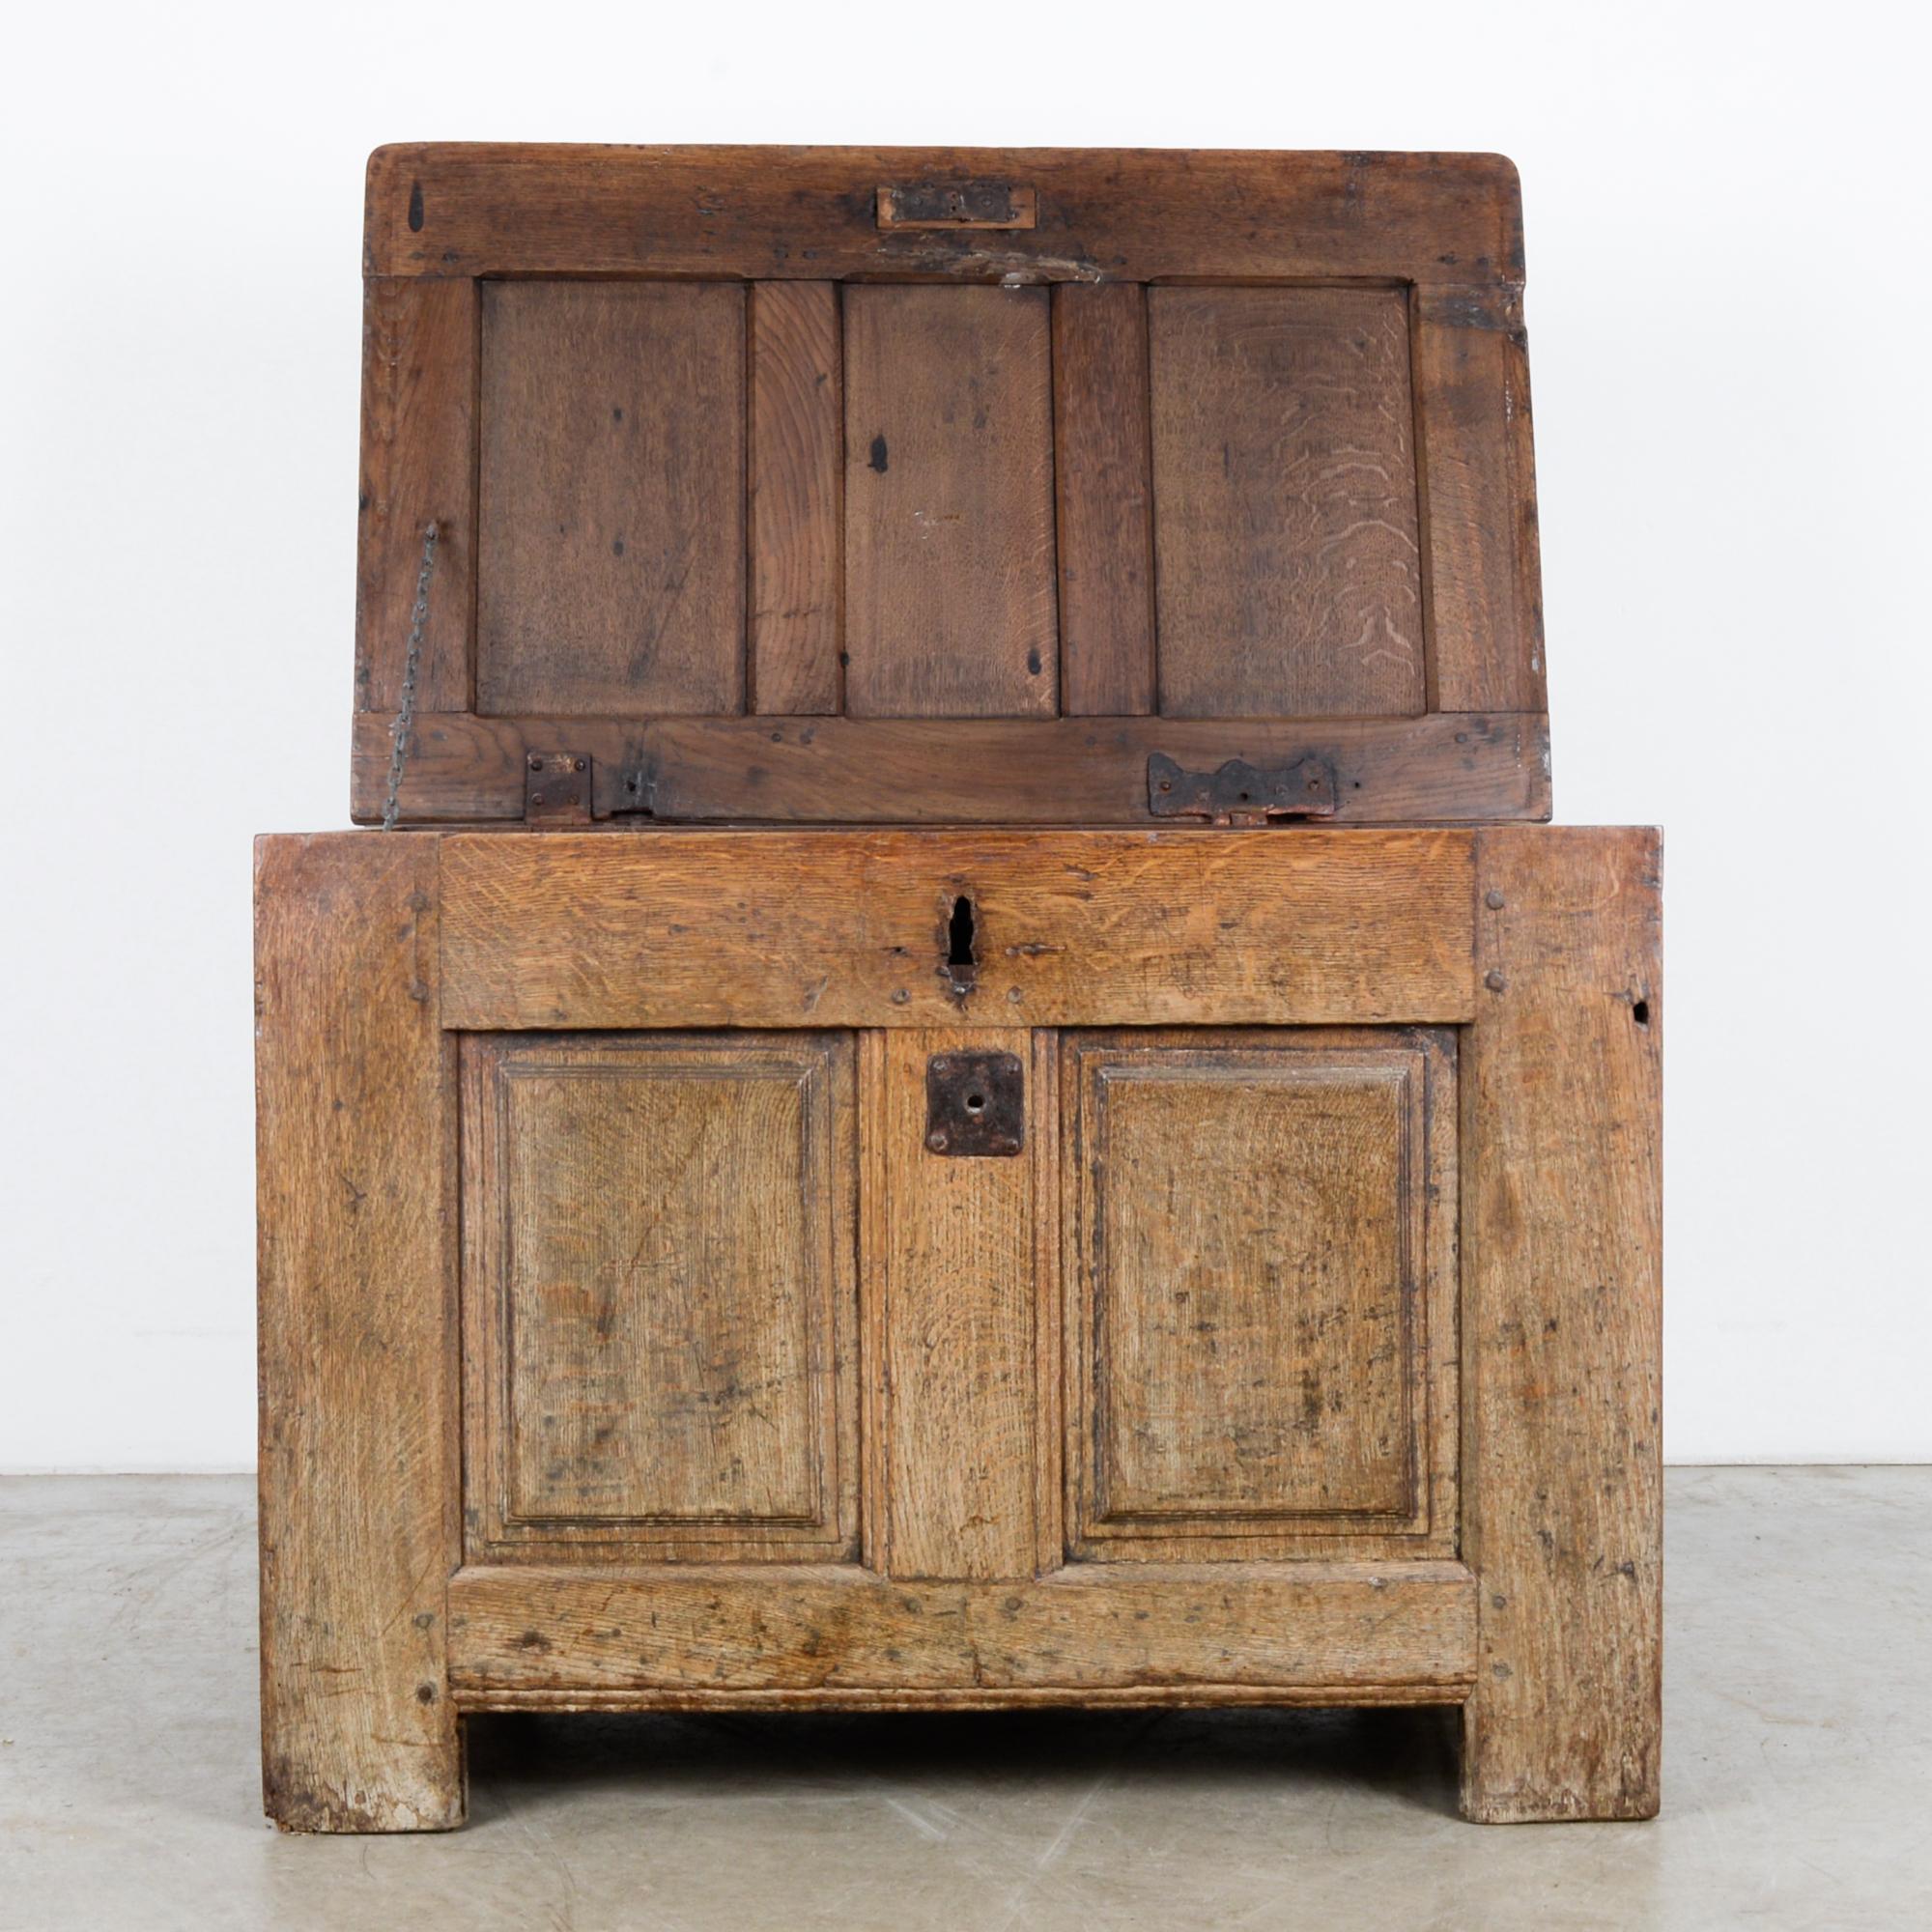 French Provincial Early 19th Century French Wooden Trunk